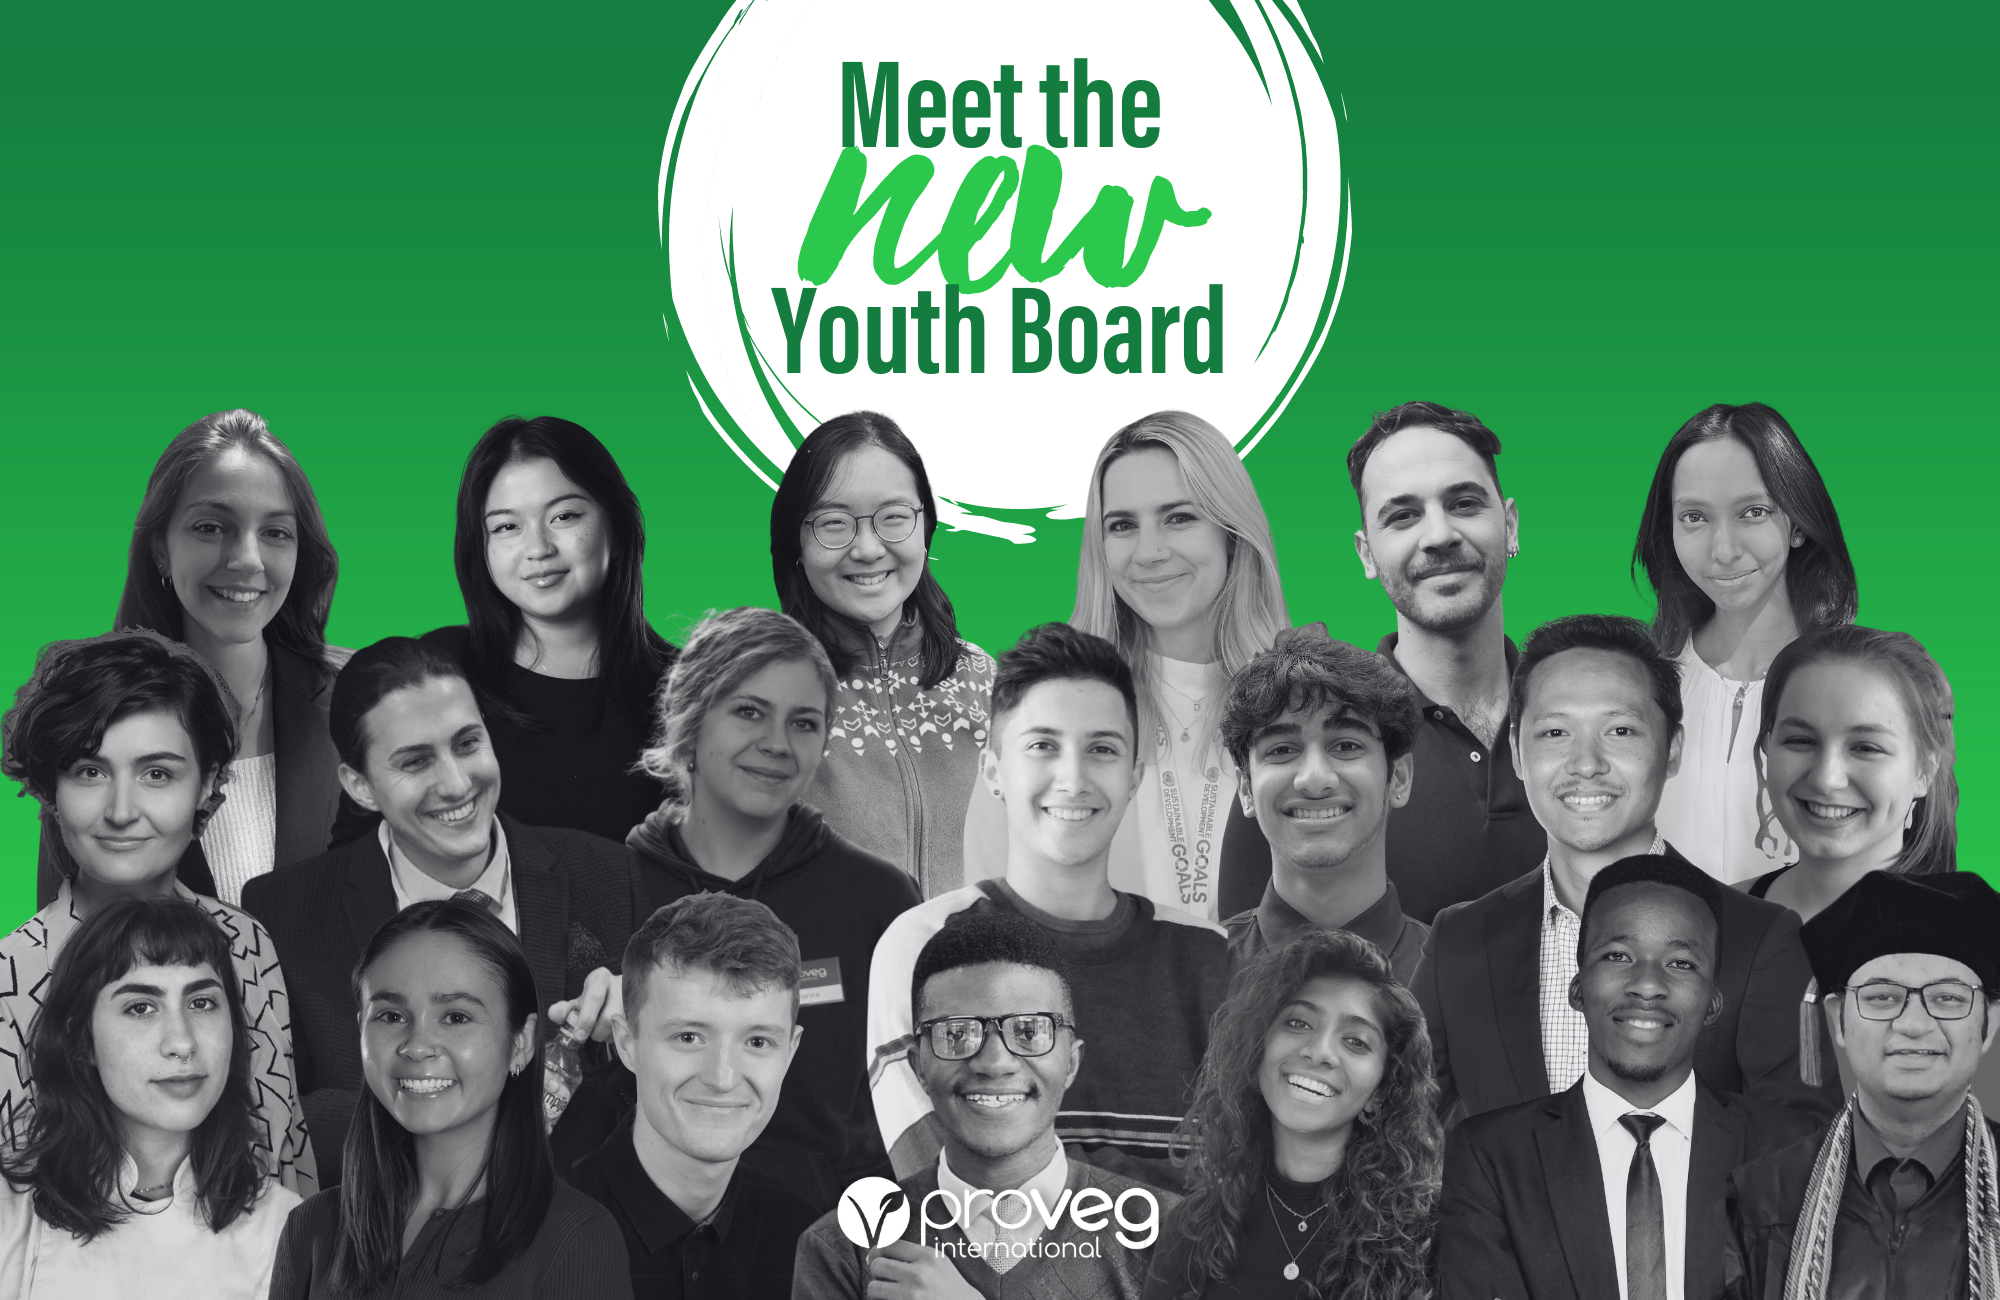 Meet our new Youth Board!